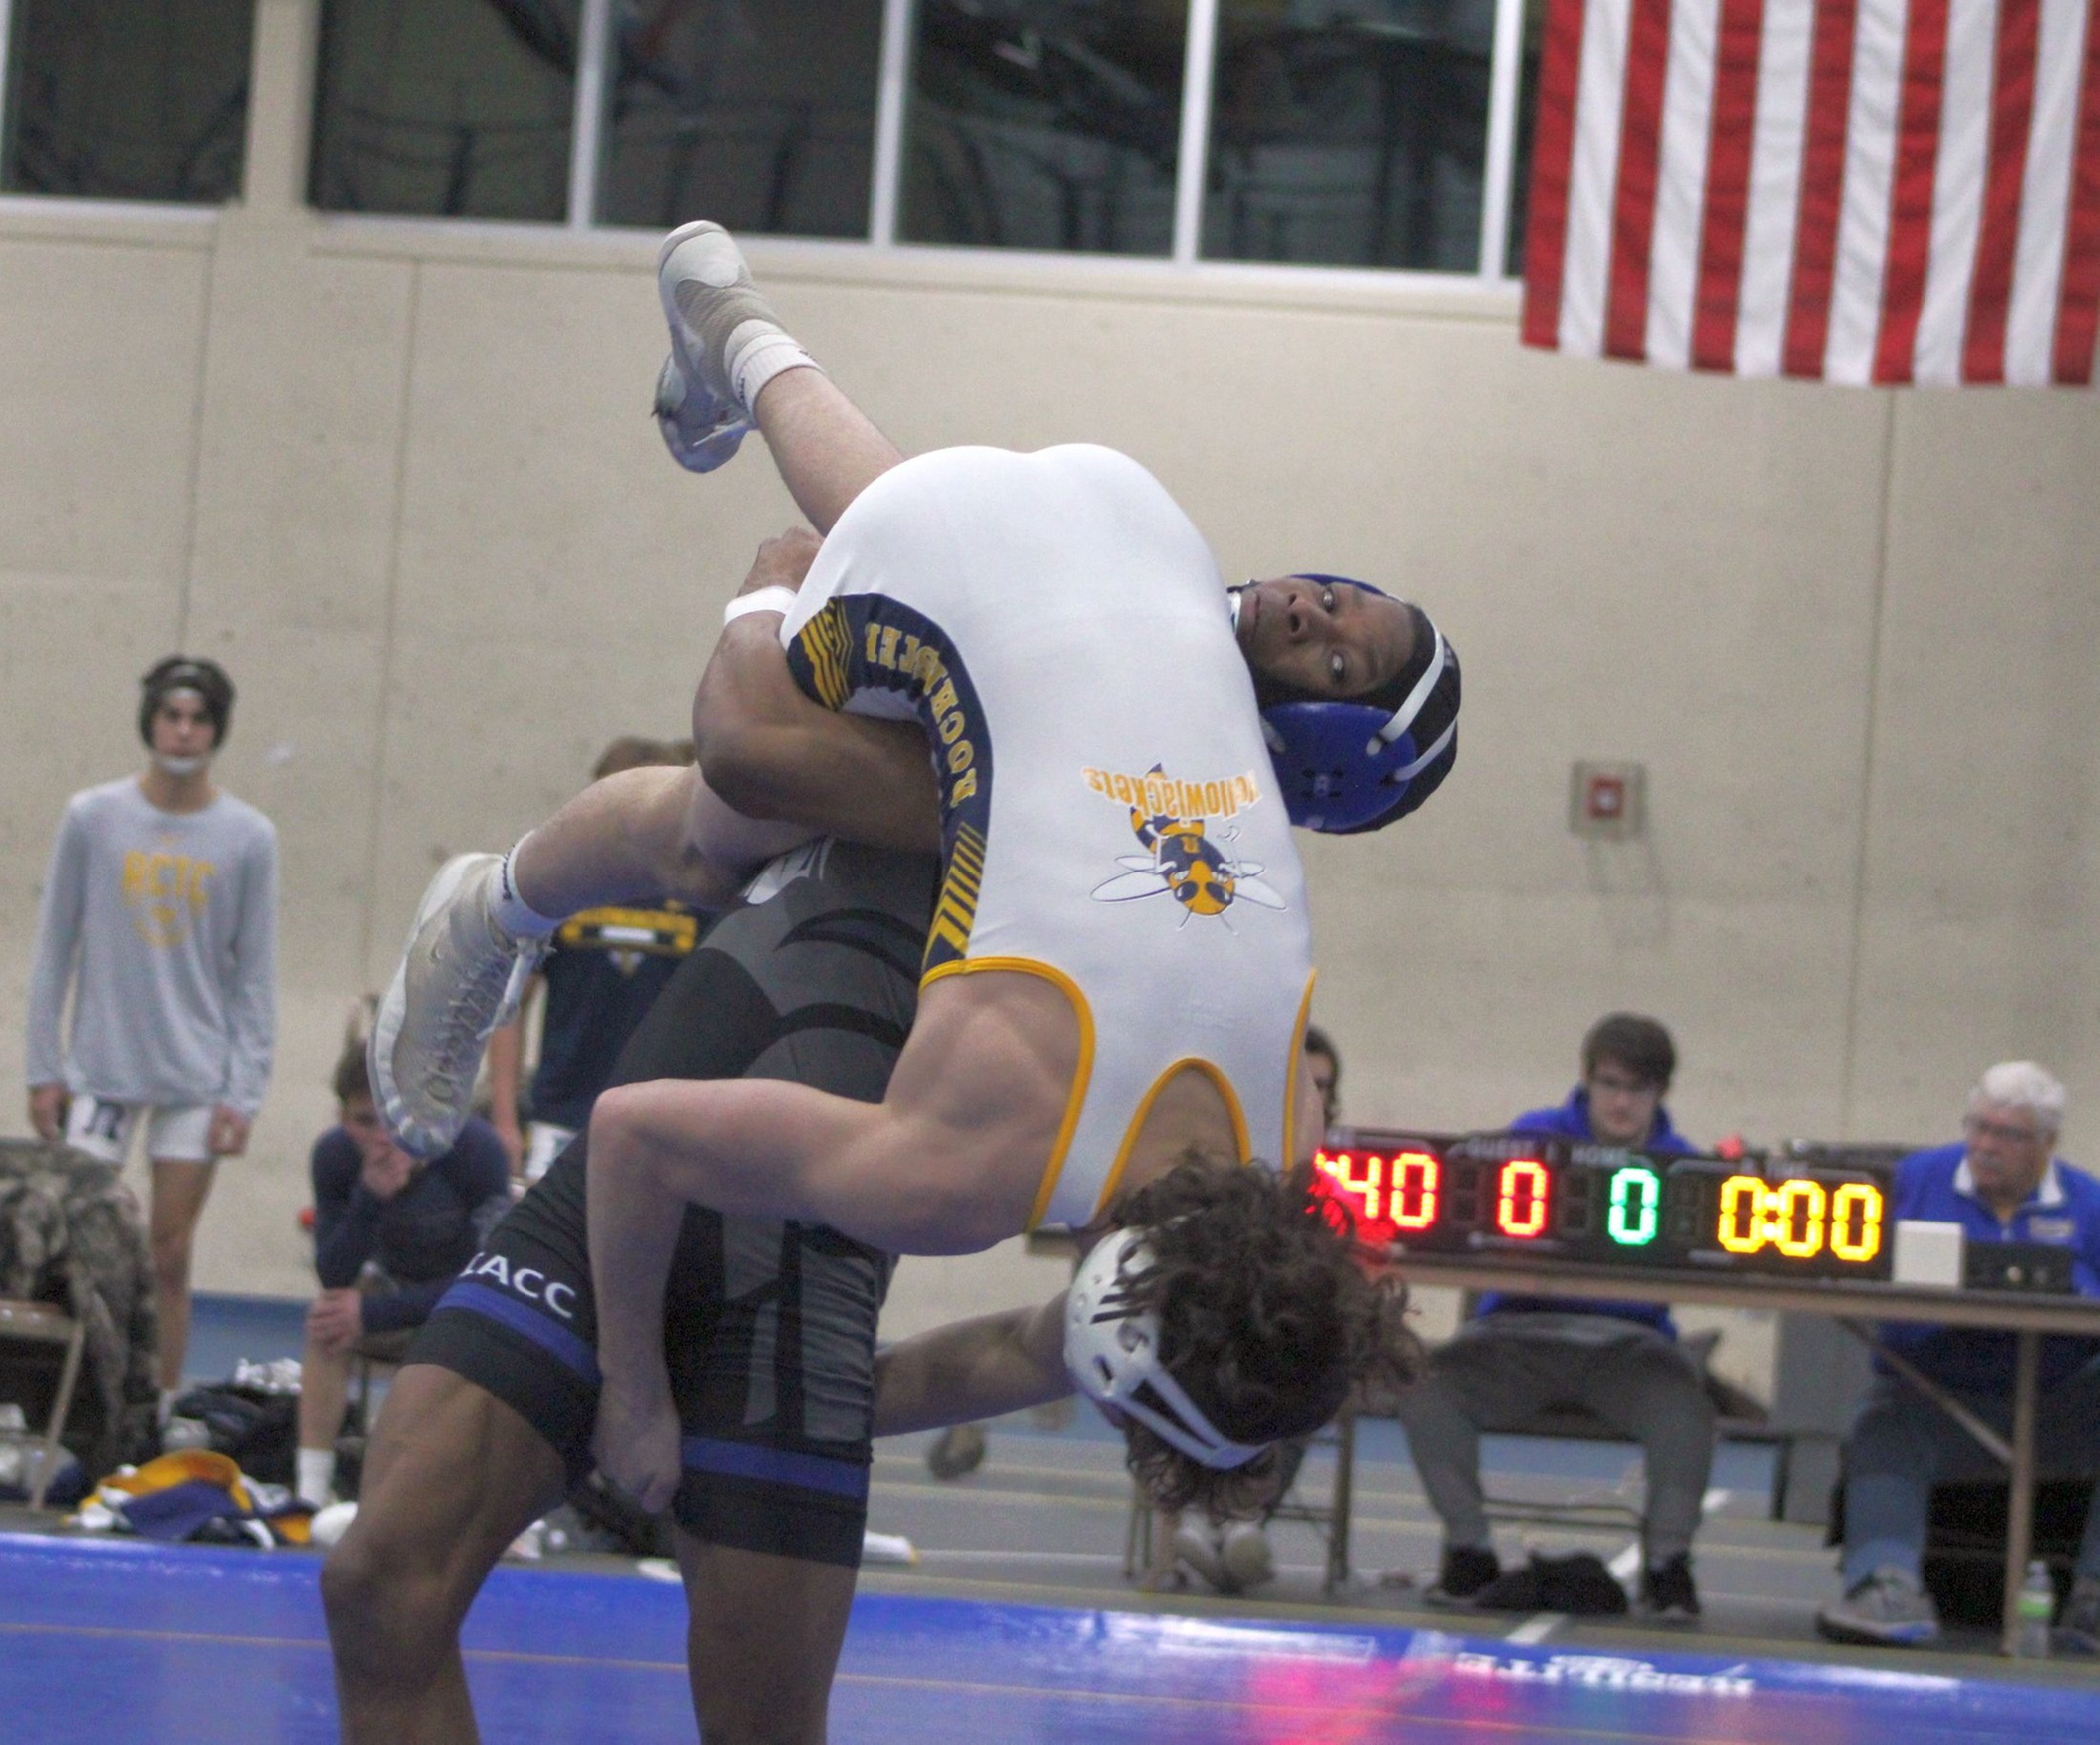 NIACC's Isaac Church lifts RCTC's Nik Petsinger in their 141-pound match Wednesday. Church won by fall in 1:24.